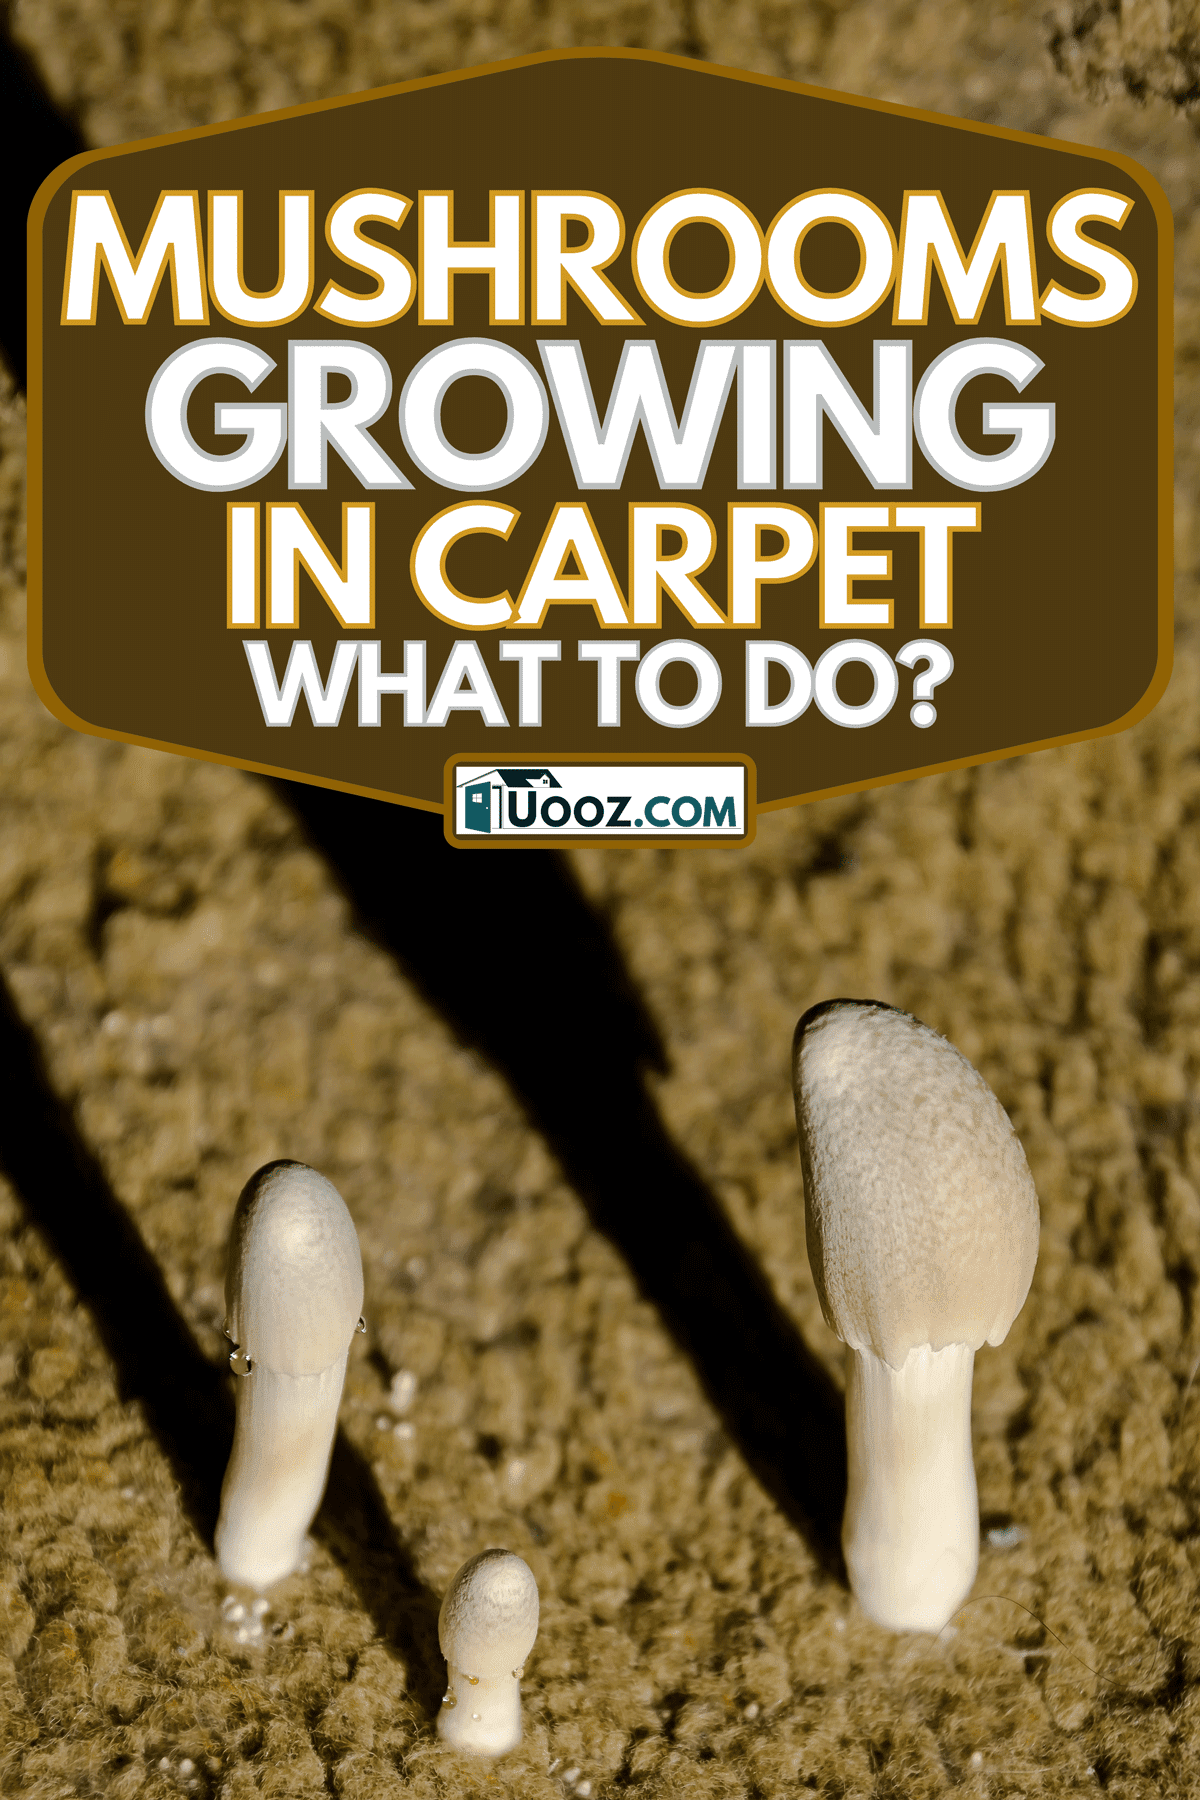 A coprinus mushrooms hatched on a carpet, Mushrooms Growing In Carpet - What To Do?